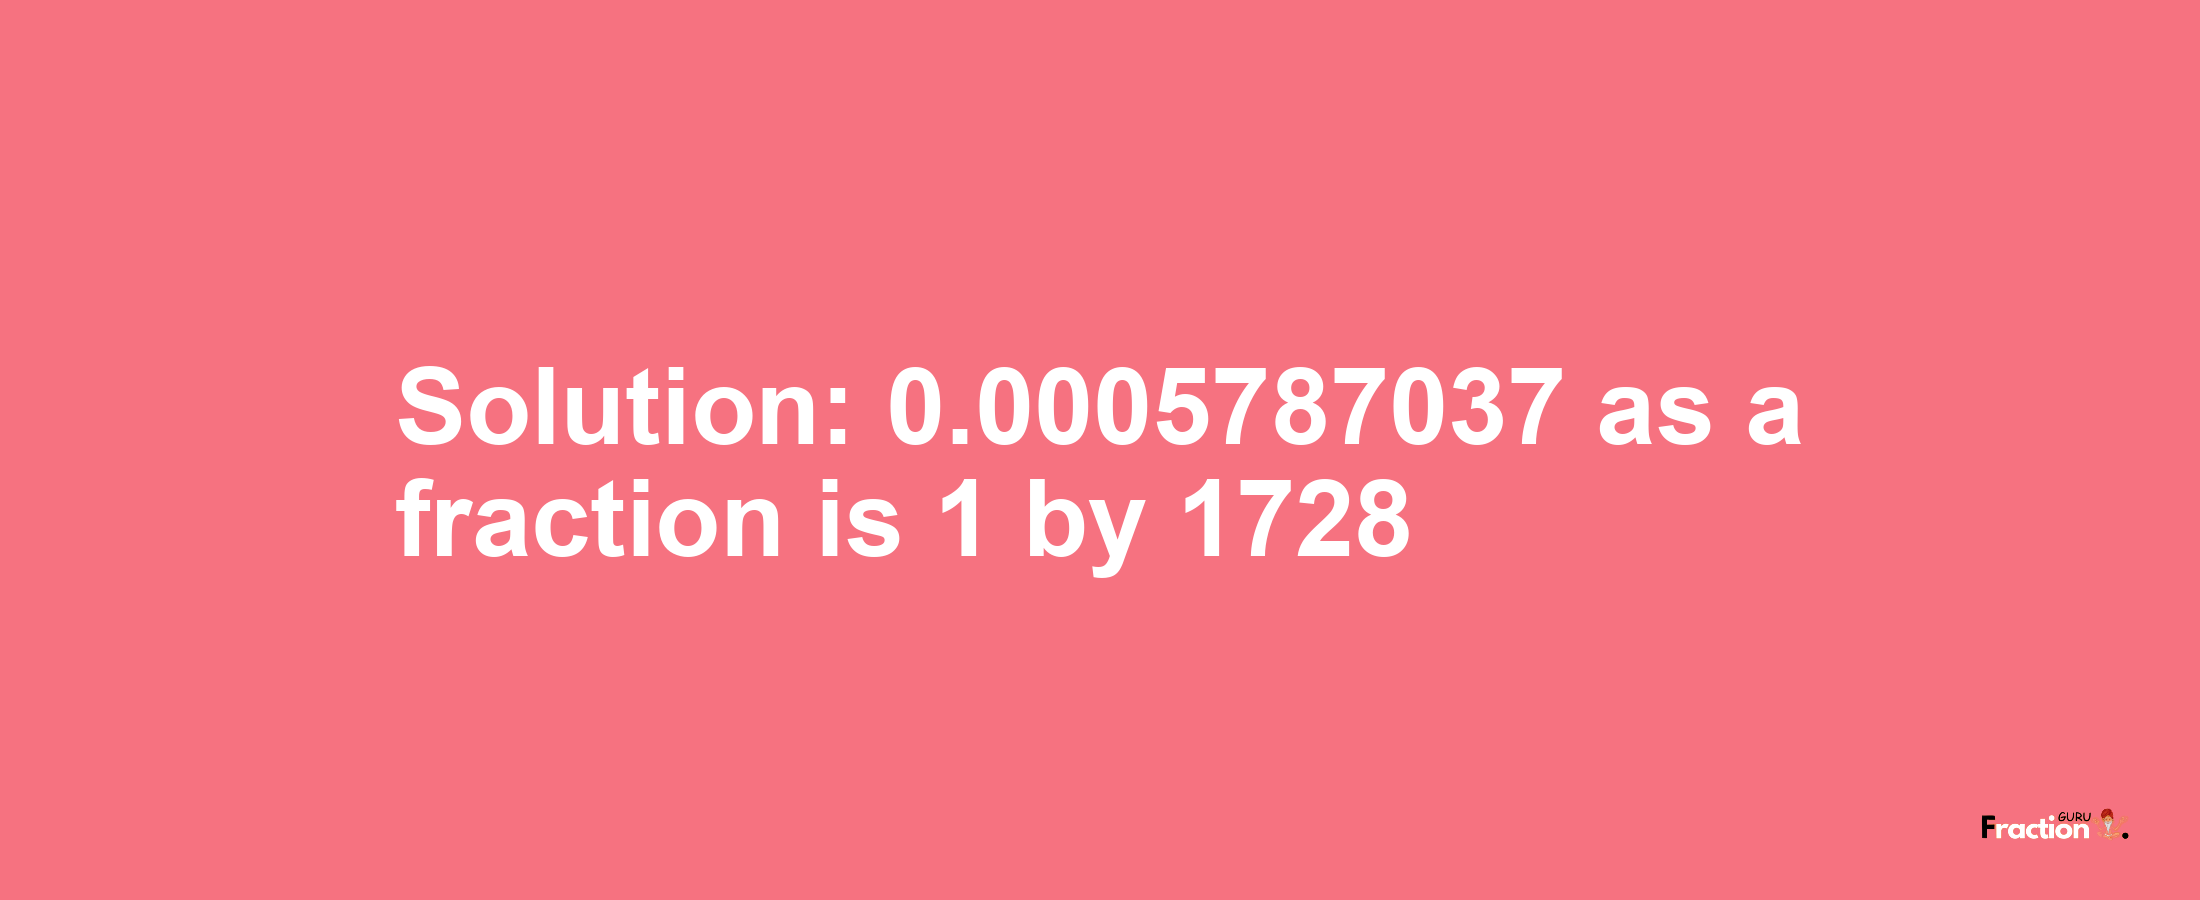 Solution:0.0005787037 as a fraction is 1/1728